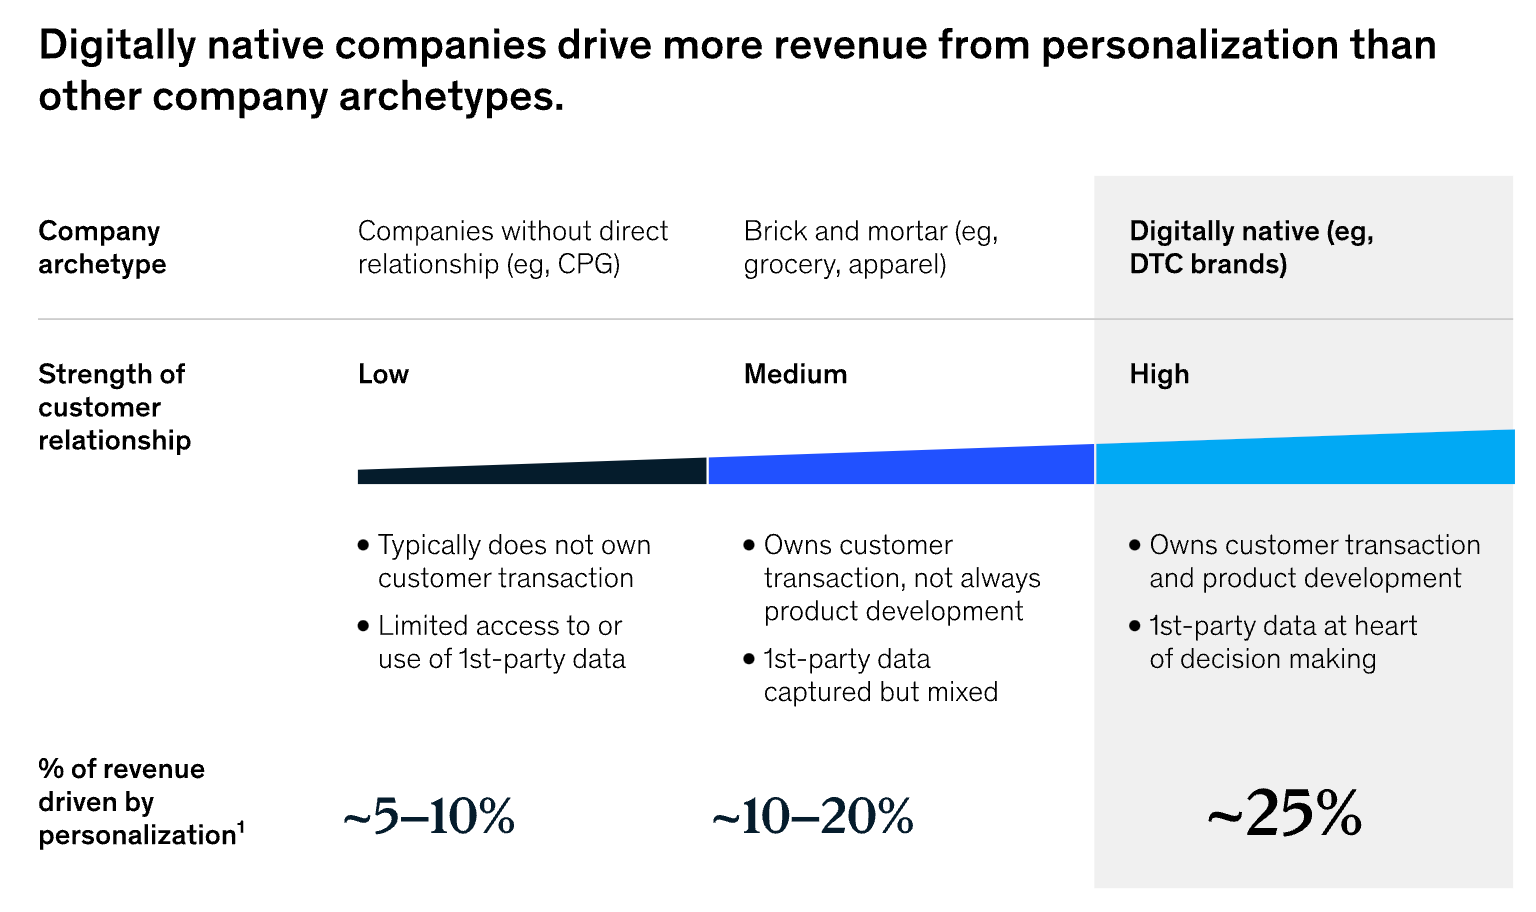 Digitally native companies drive more revenue from personalization than other company archetypes